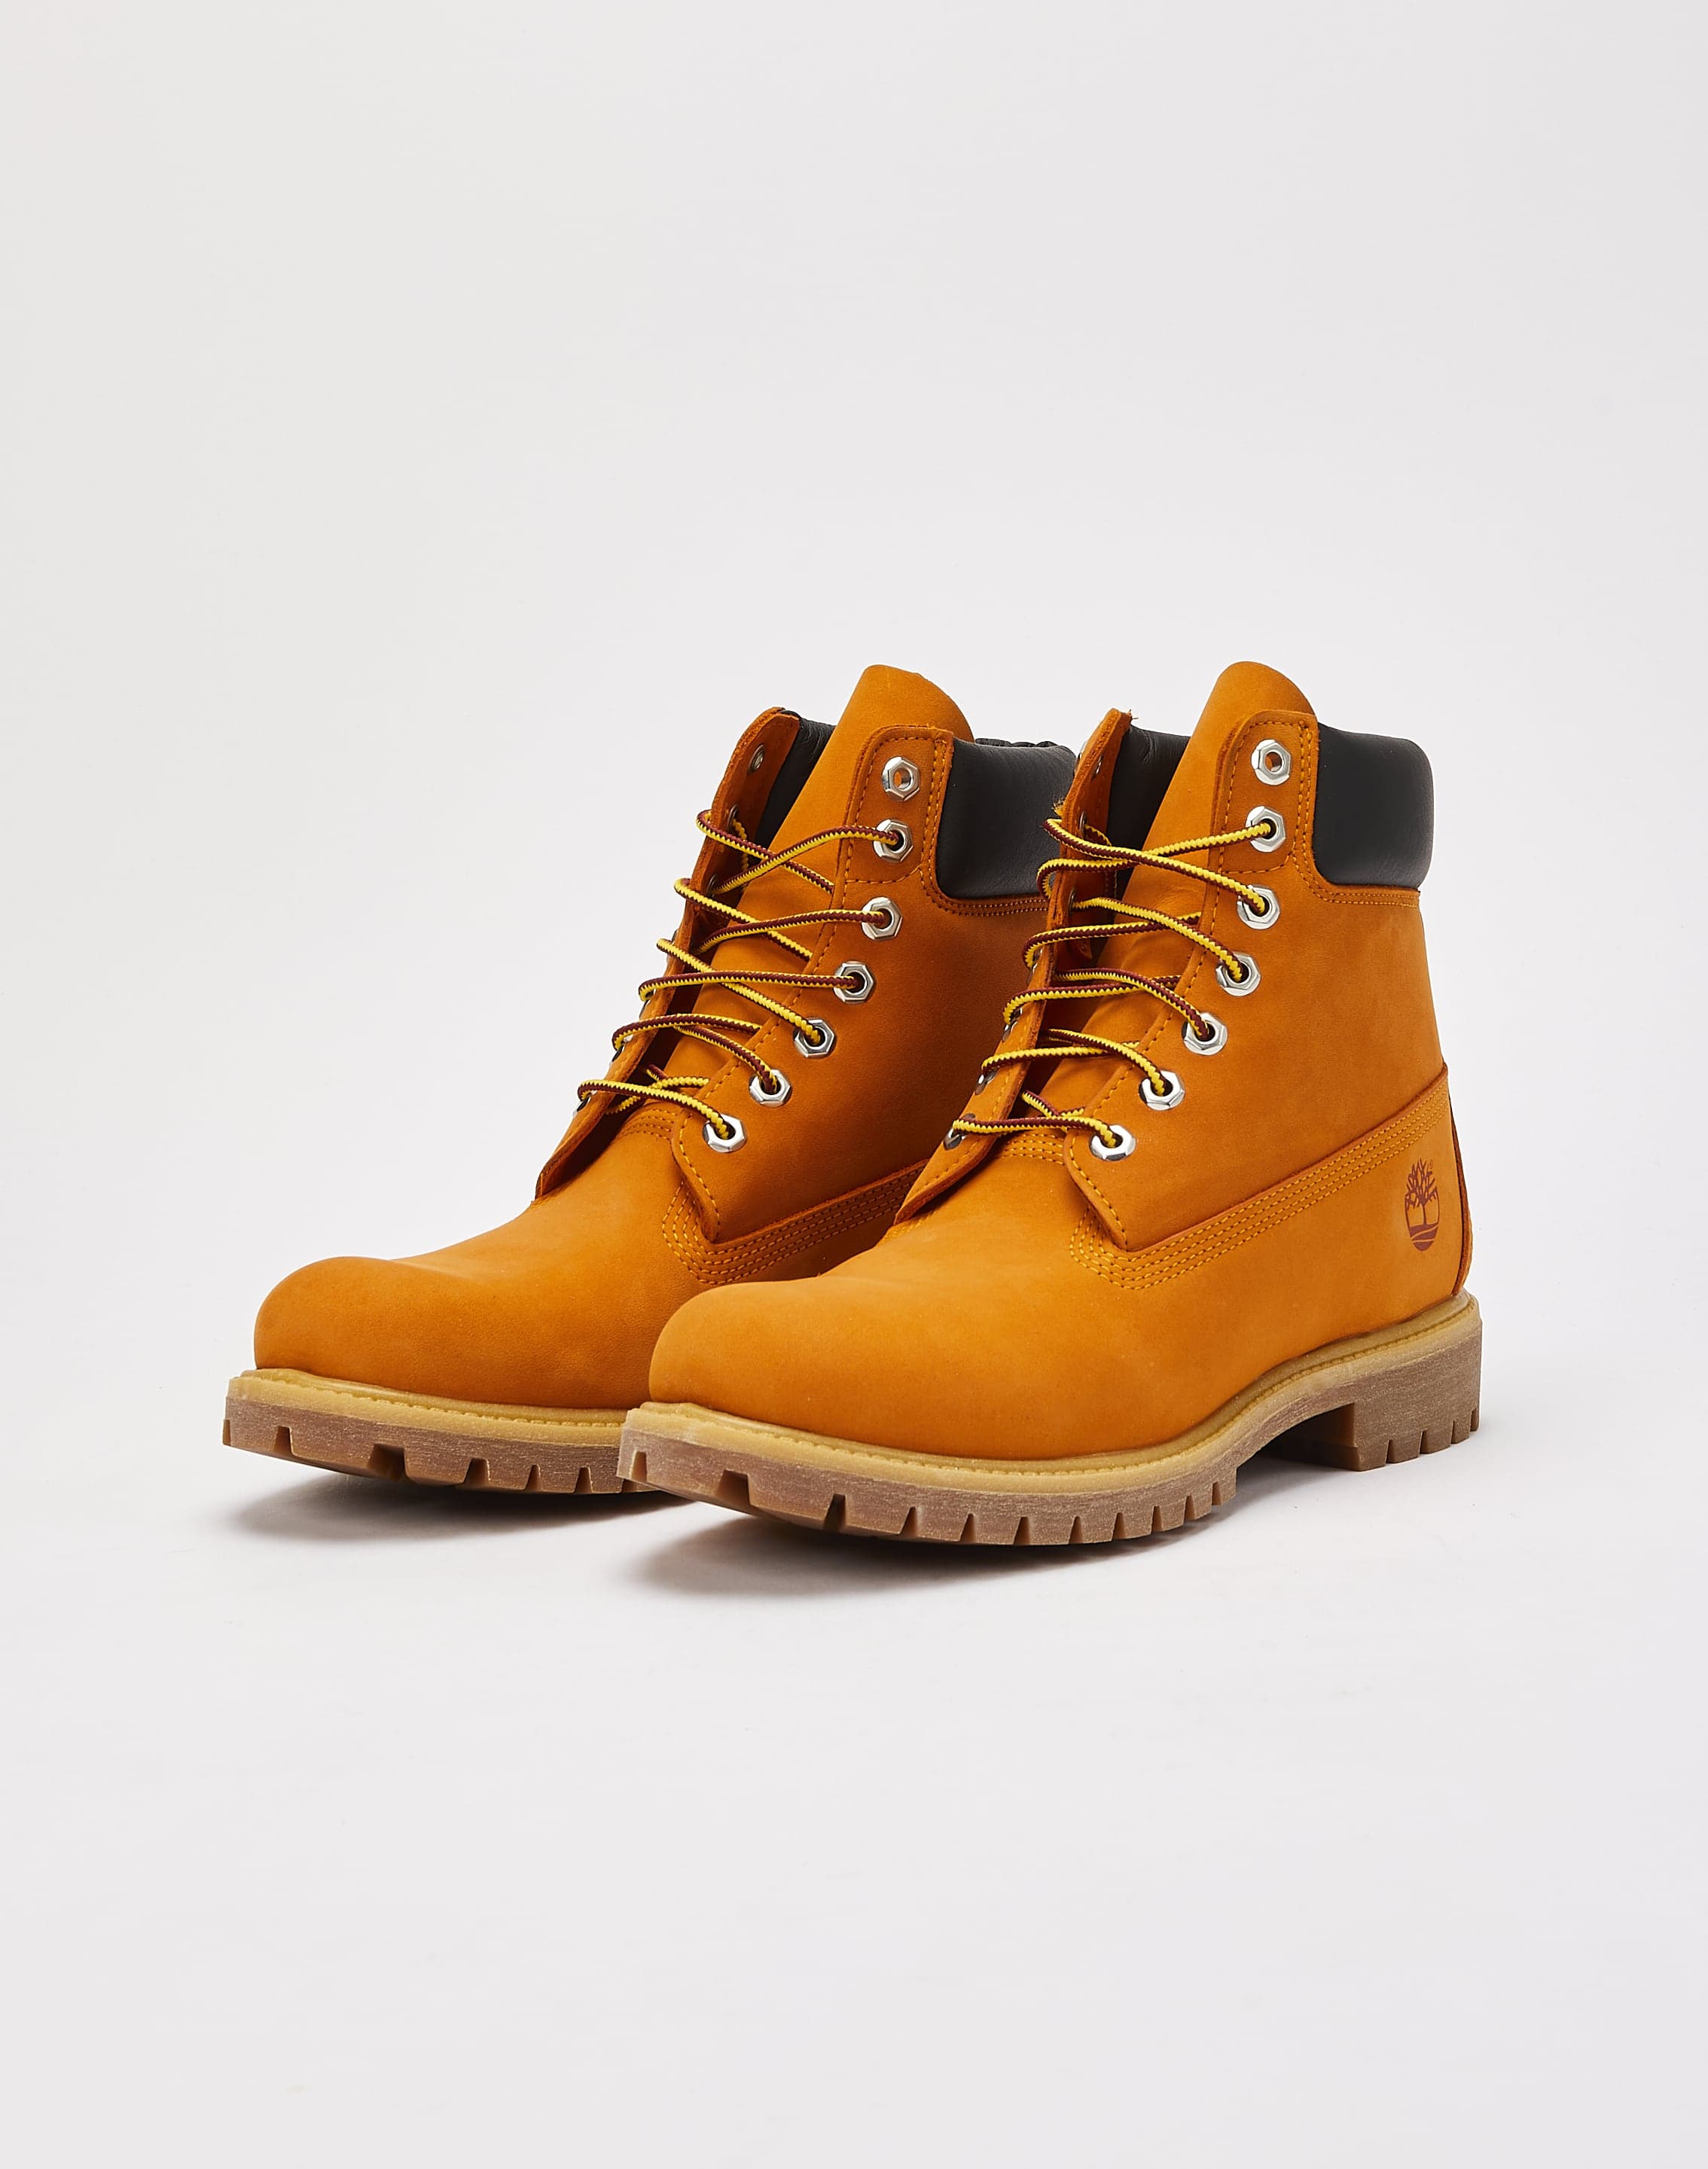 Timberland 6-Inch Boots 'Cheddar' – DTLR